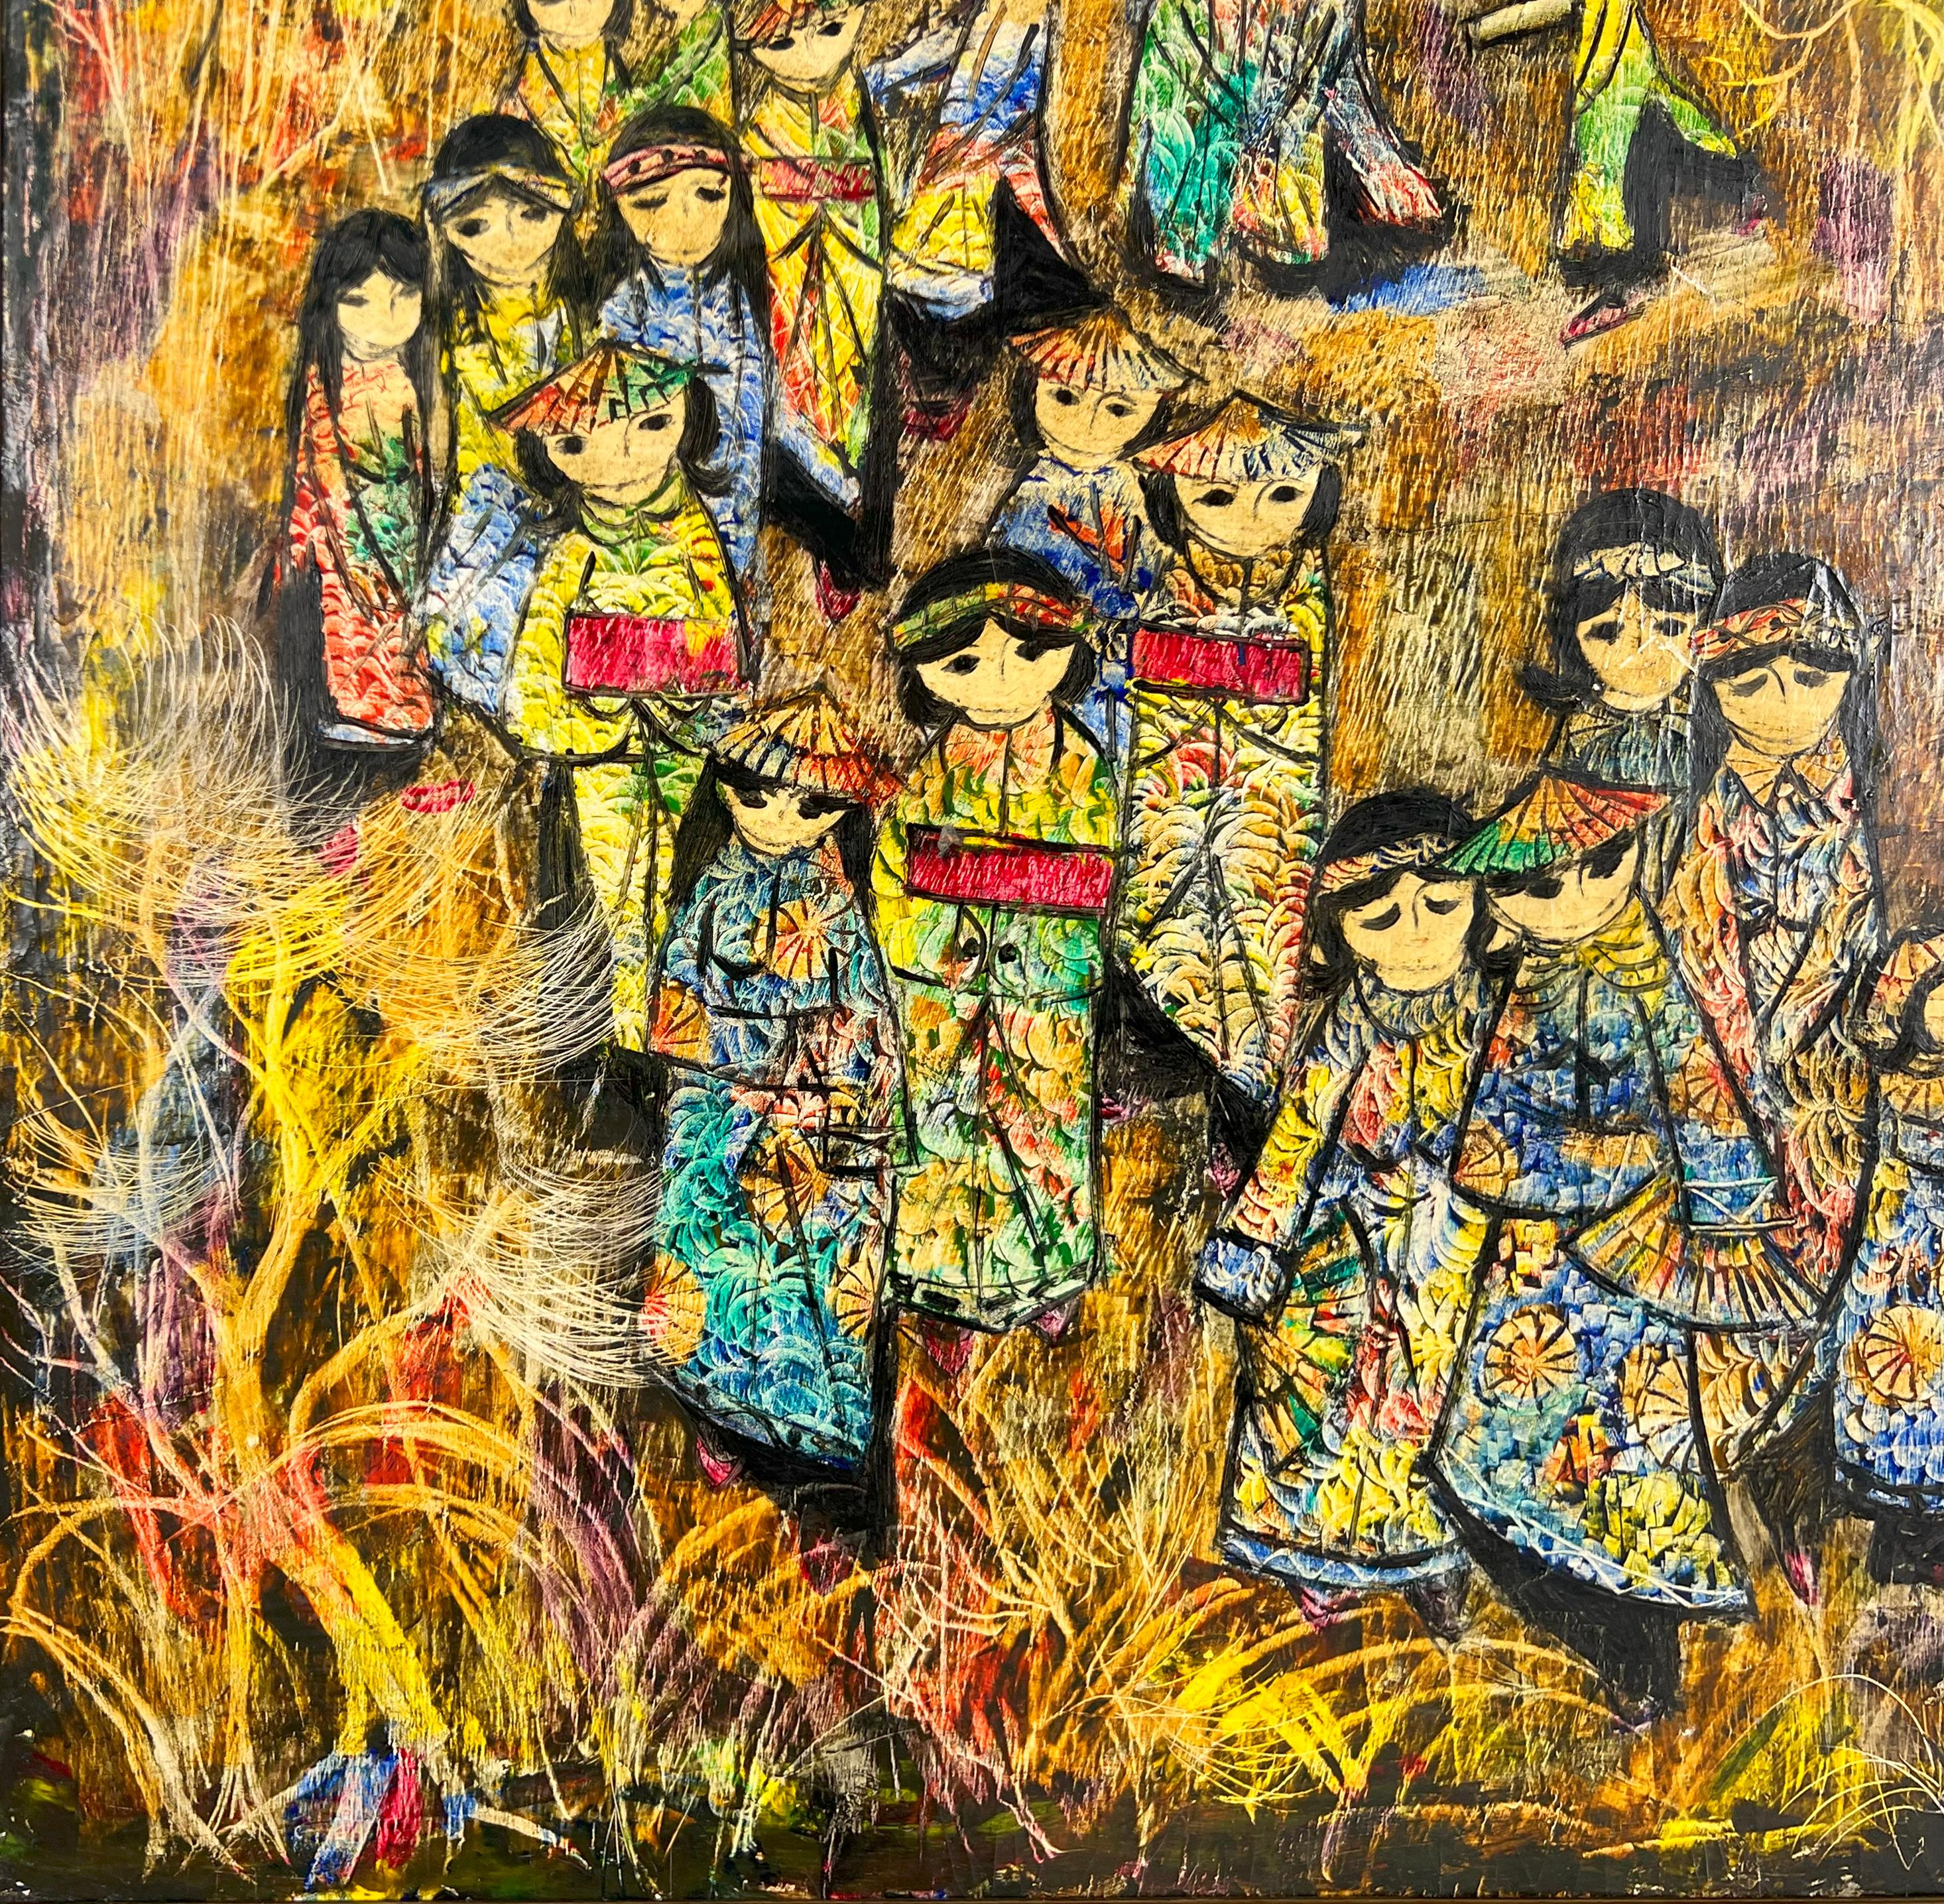 Traditional Celebration and Costumes Japan or Okinawa 
Oil painting on illustration board of Japanese Ryukyu or Okinawa Island festival goers by and unknown artist. 
Elegantly dressed villagers with canopies and Hats. Floral Kimonos with traditional